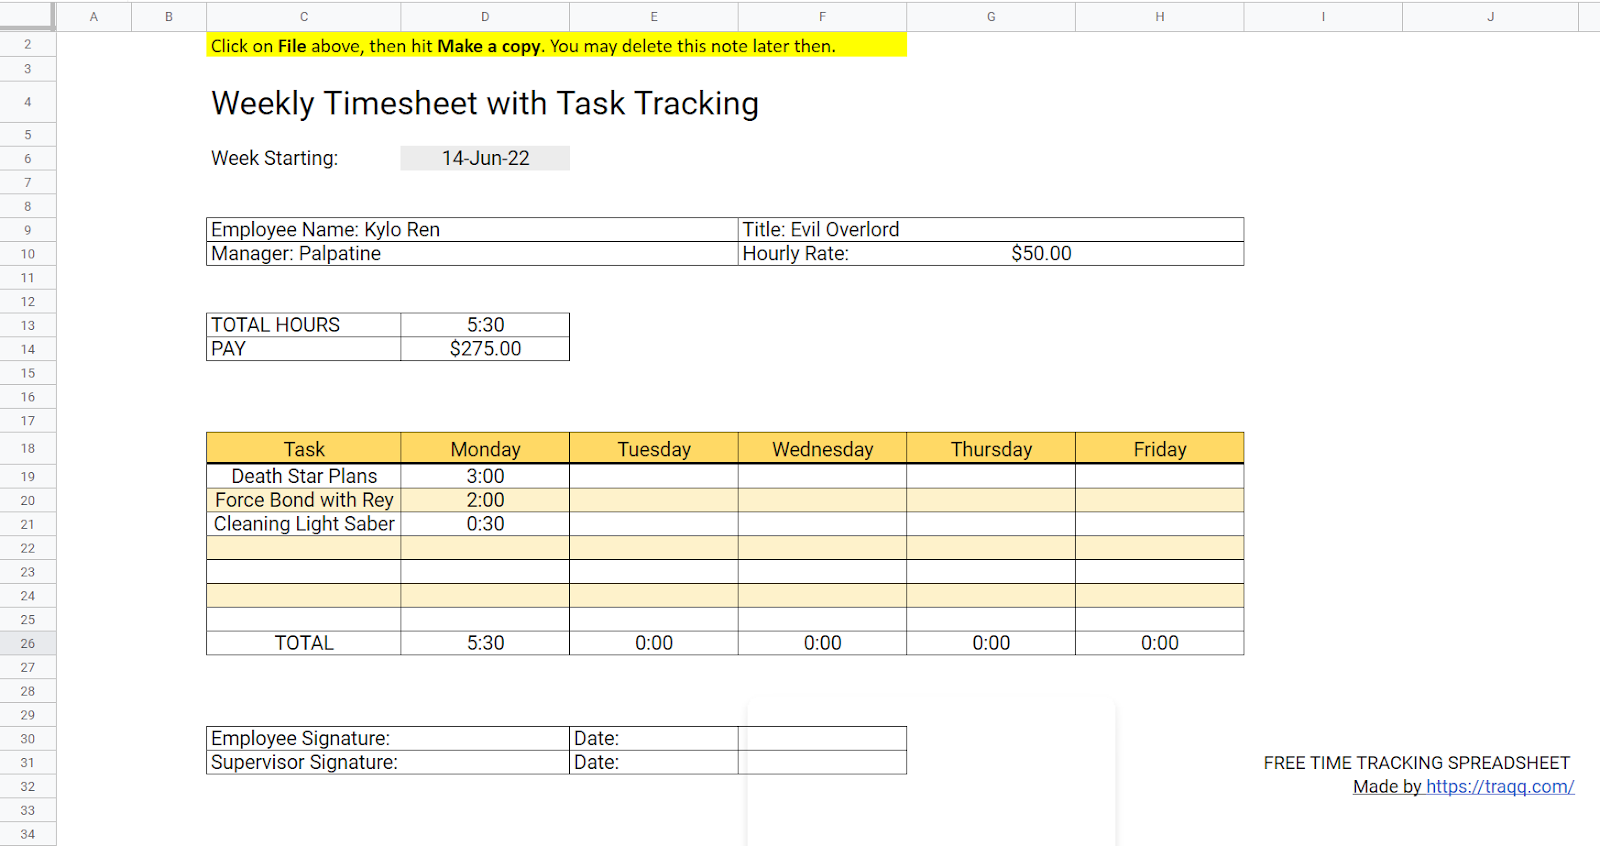 weekly timesheet with task tracking